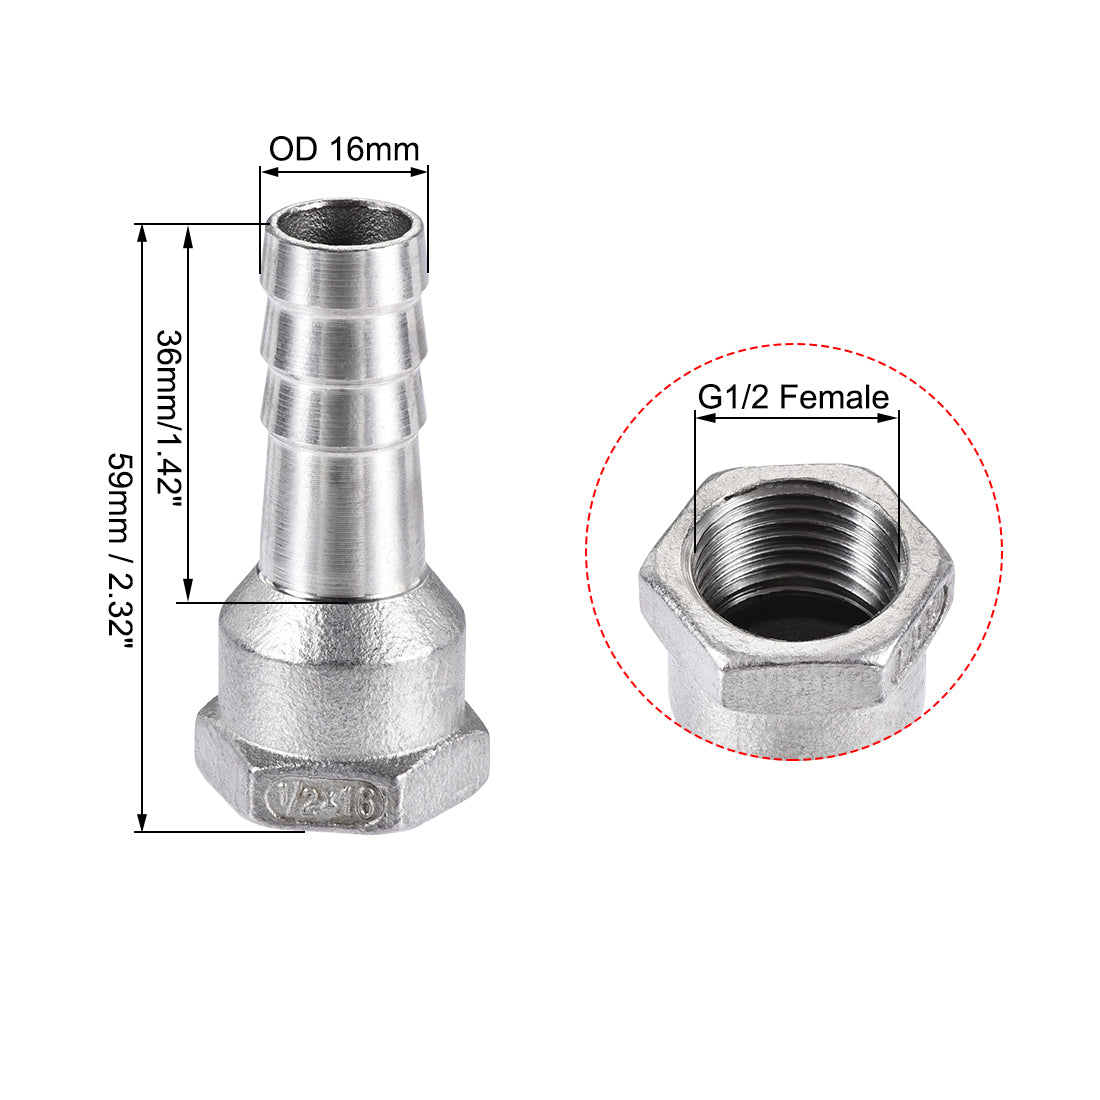 uxcell Uxcell 304 Stainless Steel Hose Barb Fitting Coupler 16mm Barb G1/2 Female Thread 2Pcs